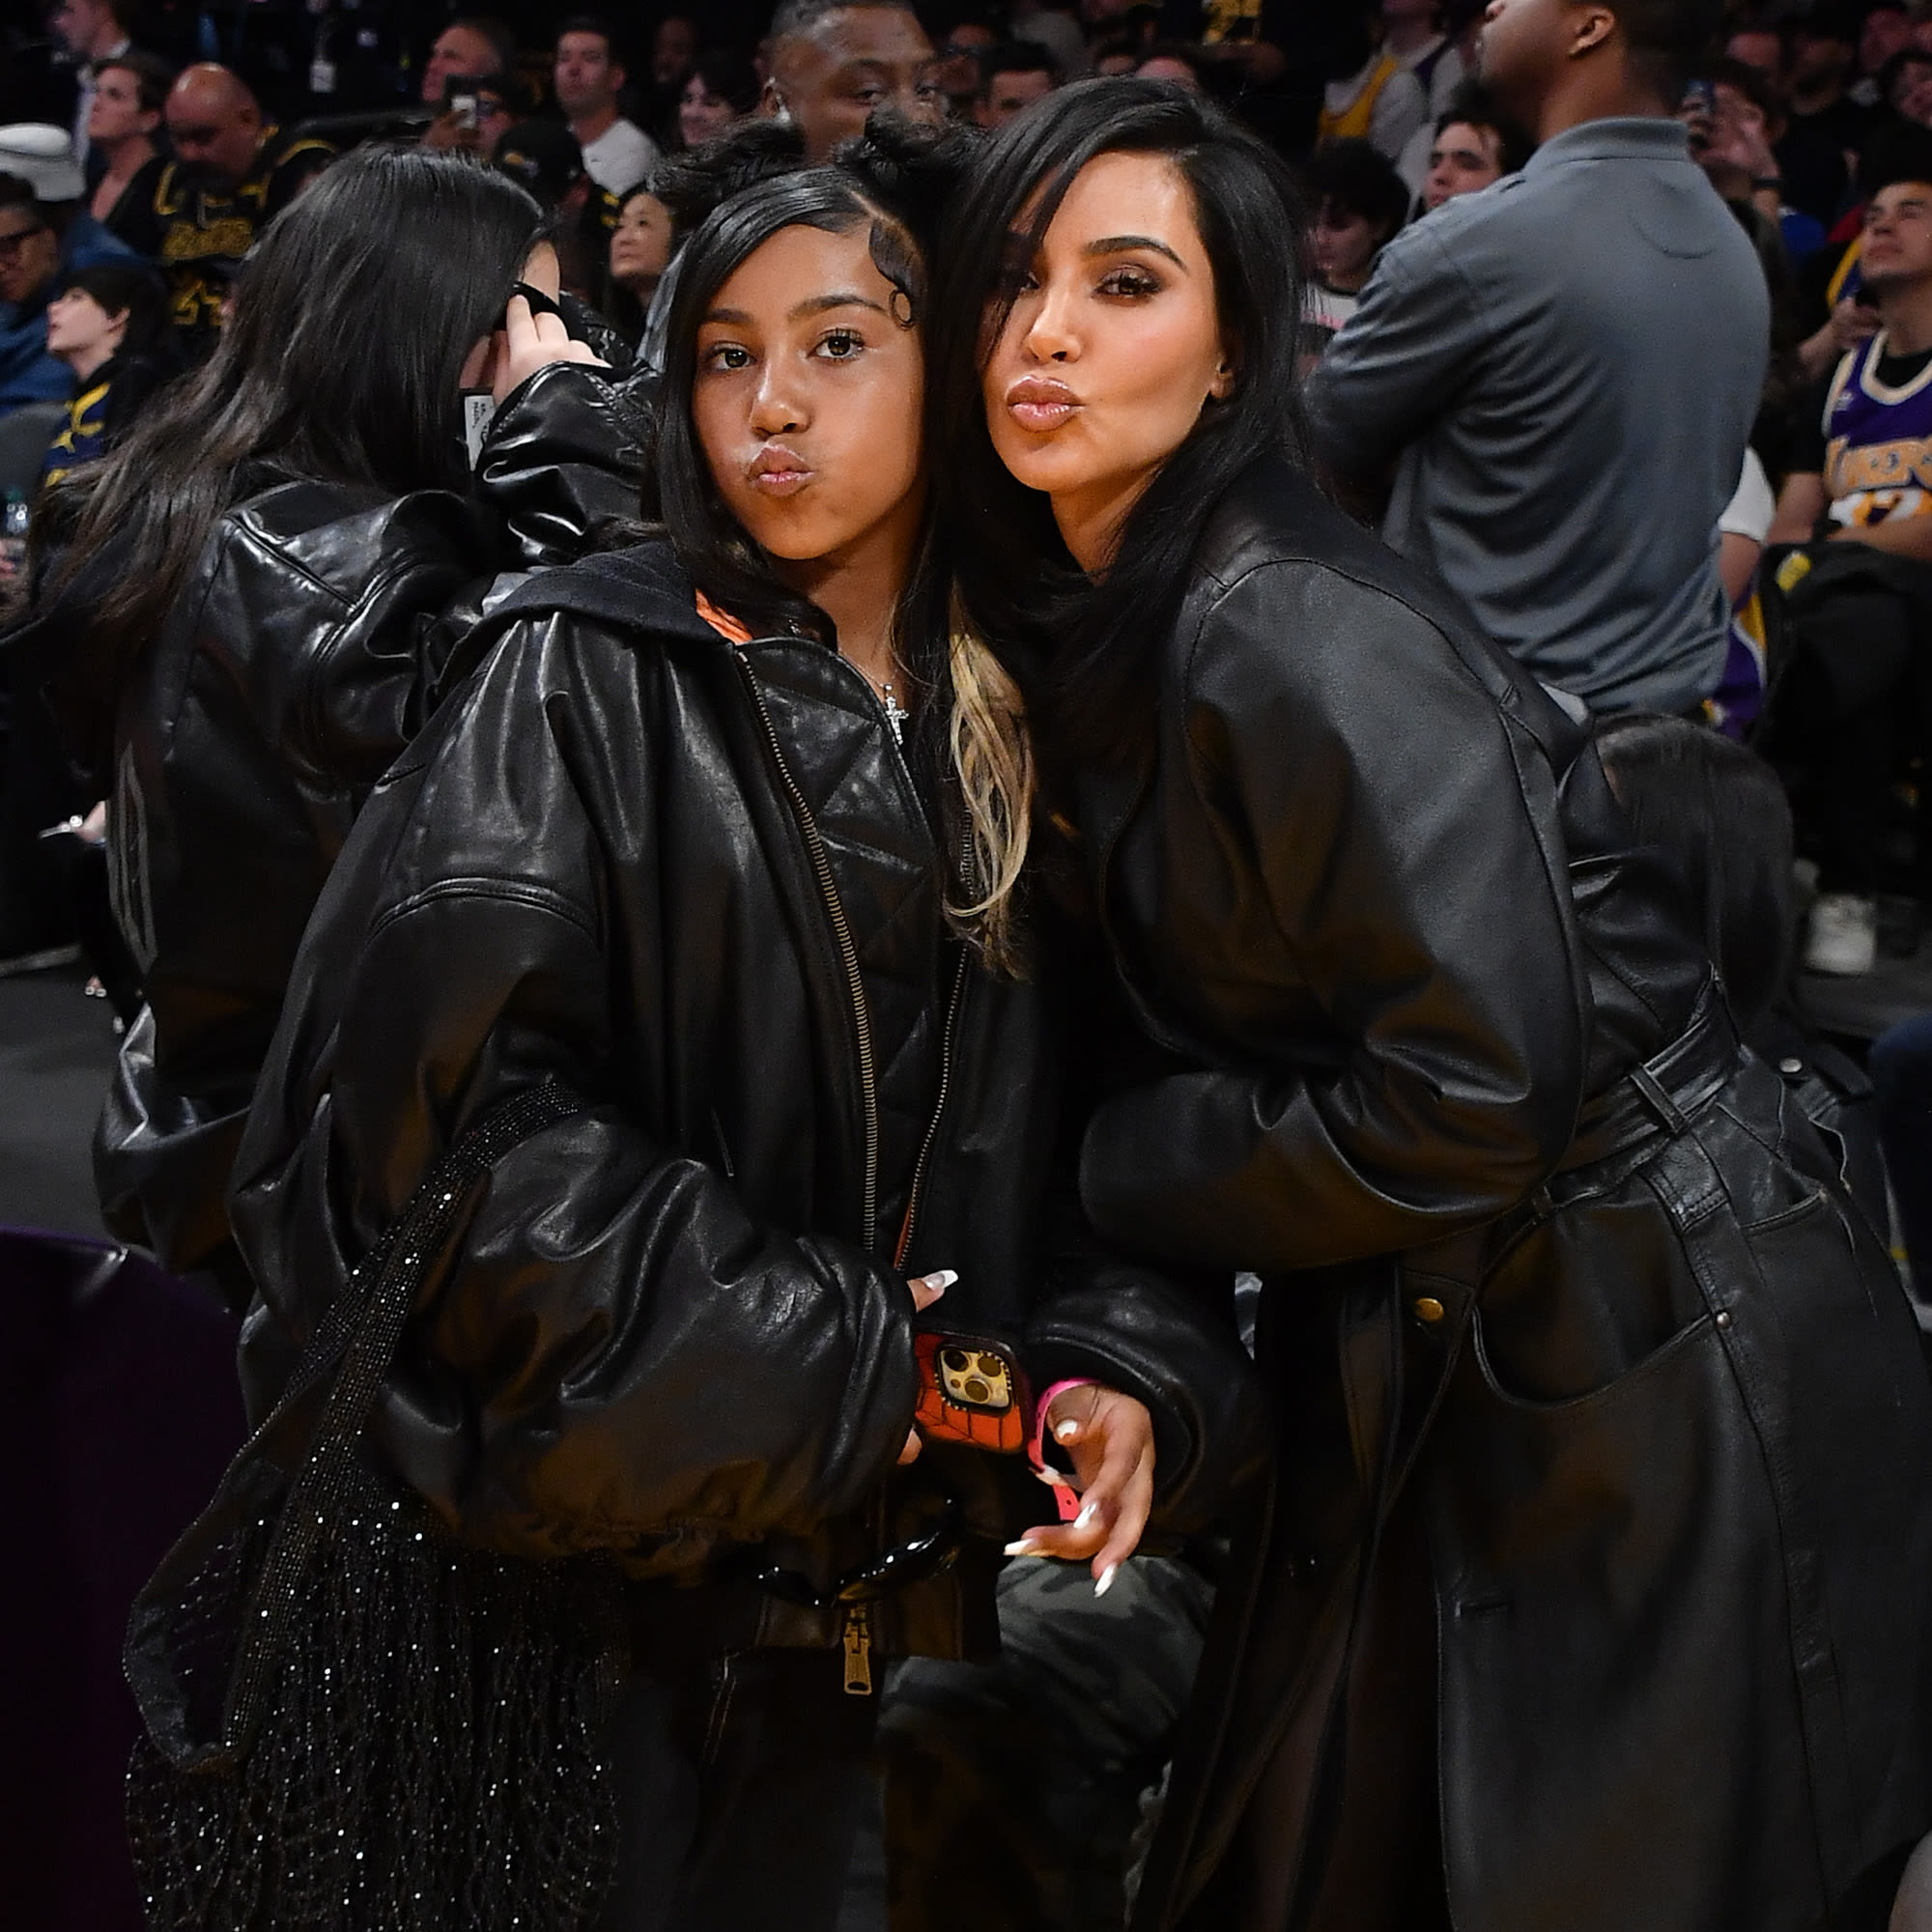 Kim Kardashian Was ‘So Impressed’ by Daughter North’s ‘Remarkable’ Job During ‘Lion King’ Concert